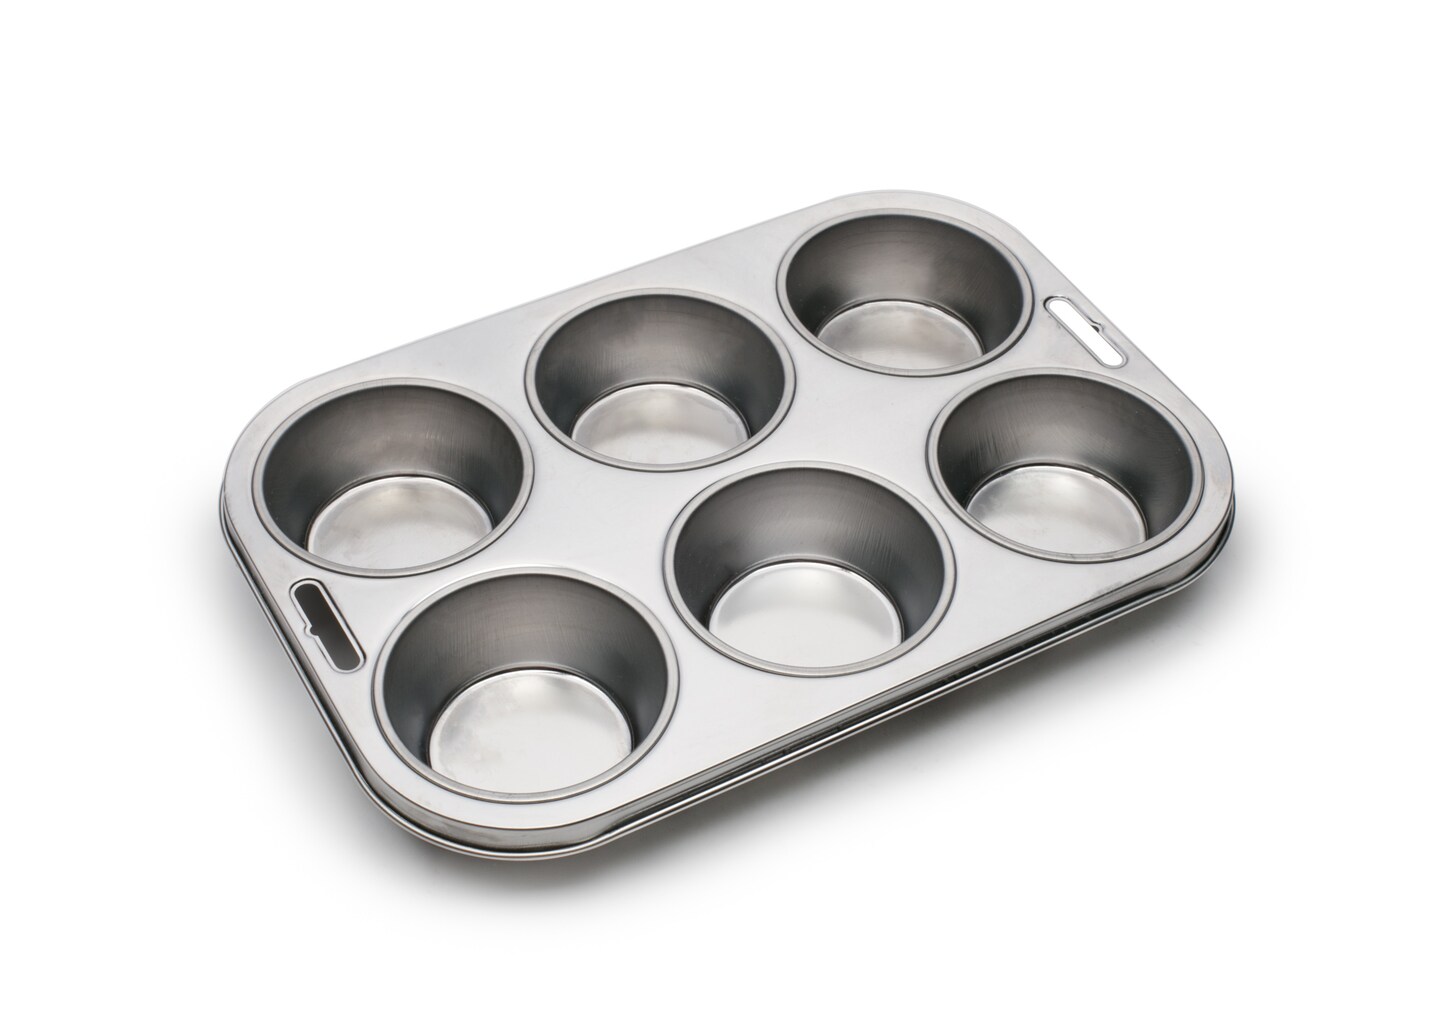 6 Cup Stainless Steel Muffin Pan